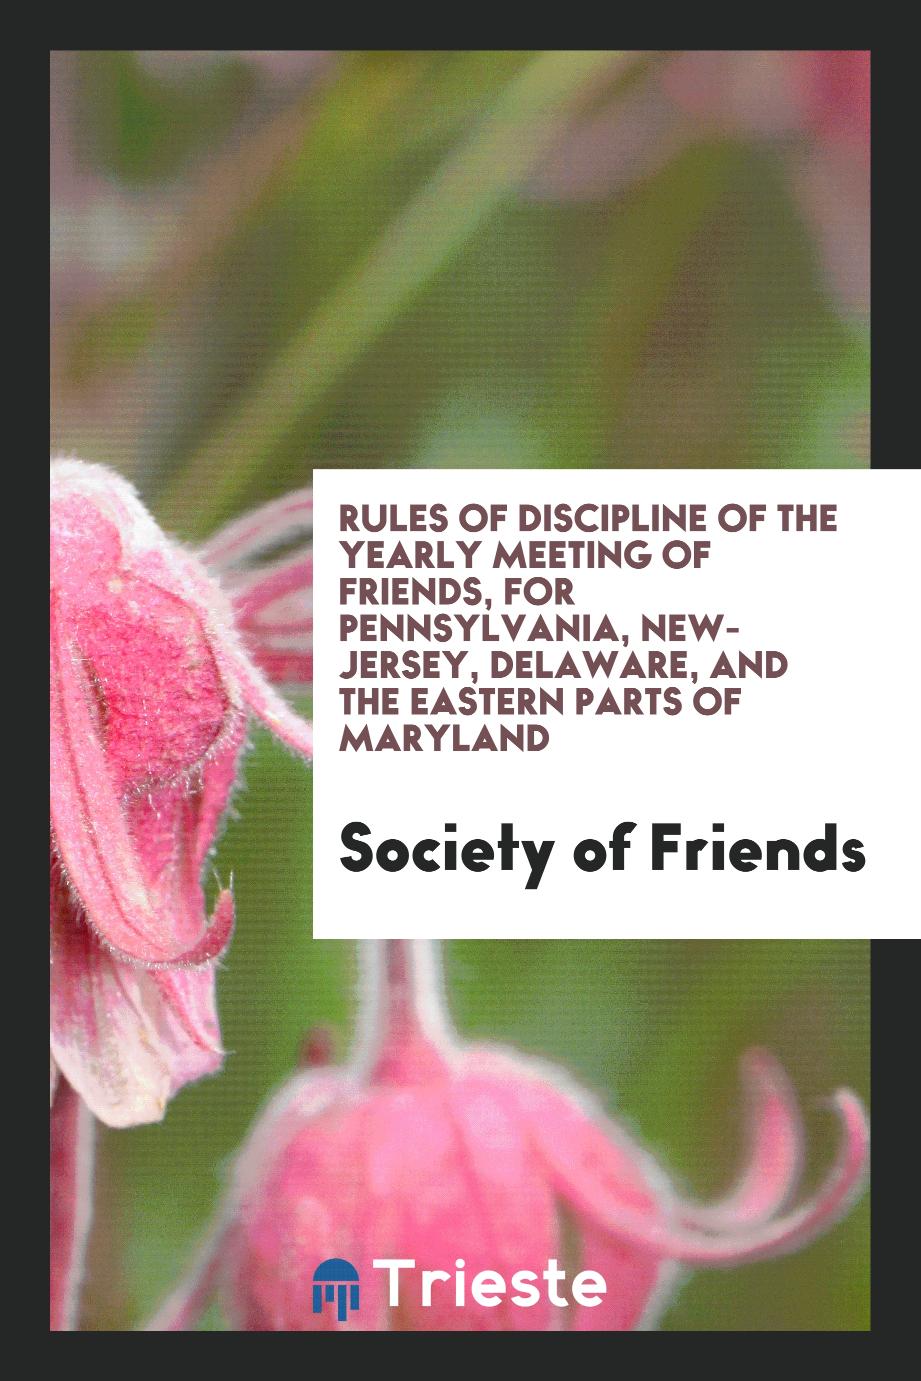 Rules of discipline of the Yearly Meeting of Friends, for Pennsylvania, New-Jersey, Delaware, and the eastern parts of Maryland